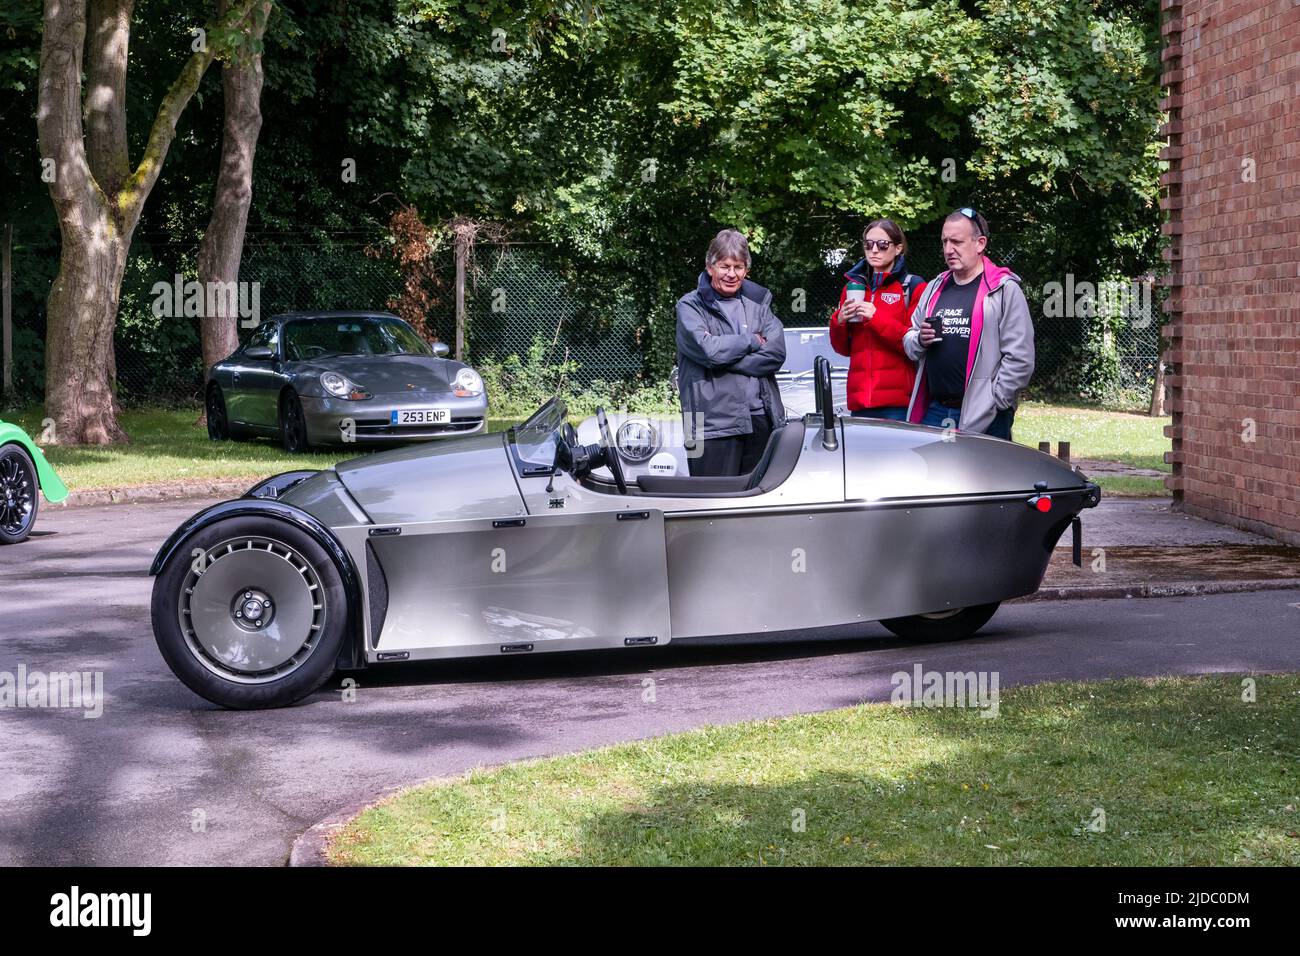 New Morgan three wheeler at the June 2022 Bicester Heritage Scramble classic car event Stock Photo